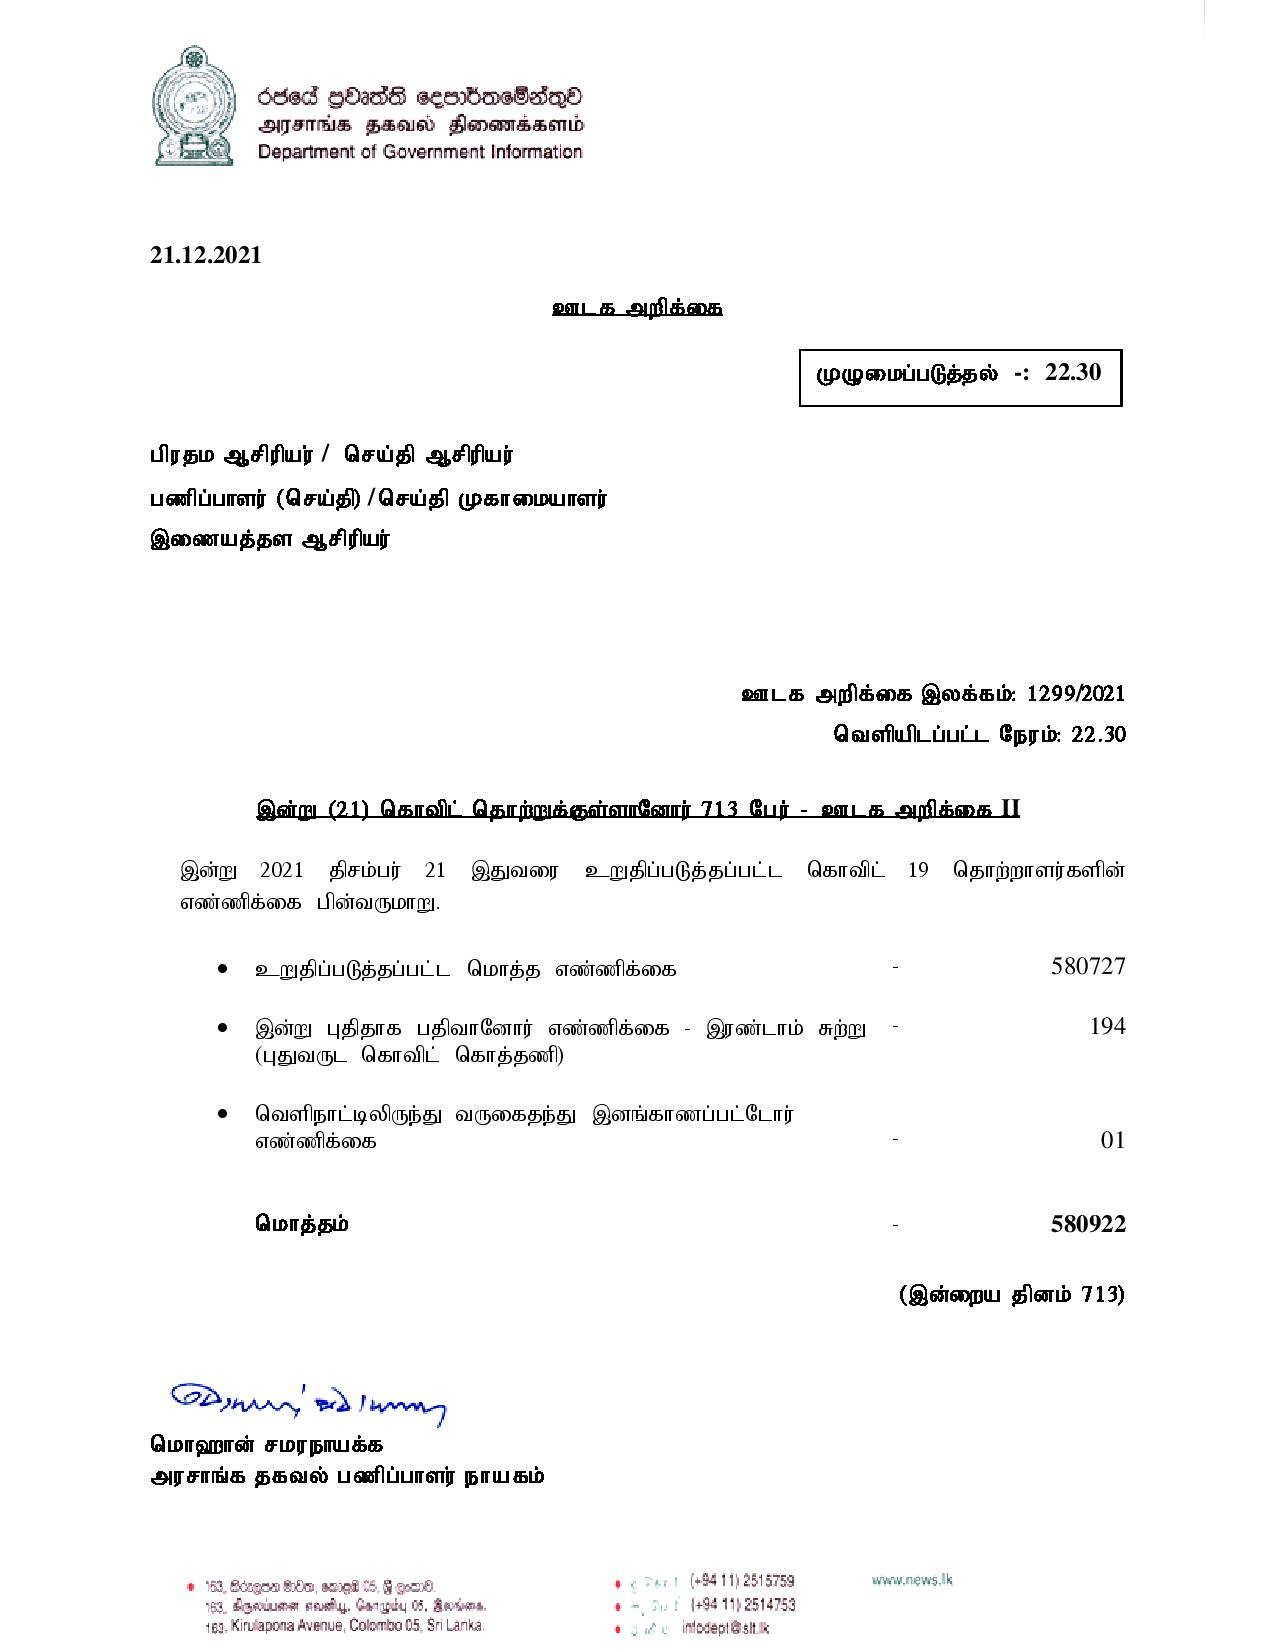 Release No 1299 Tamil page 001